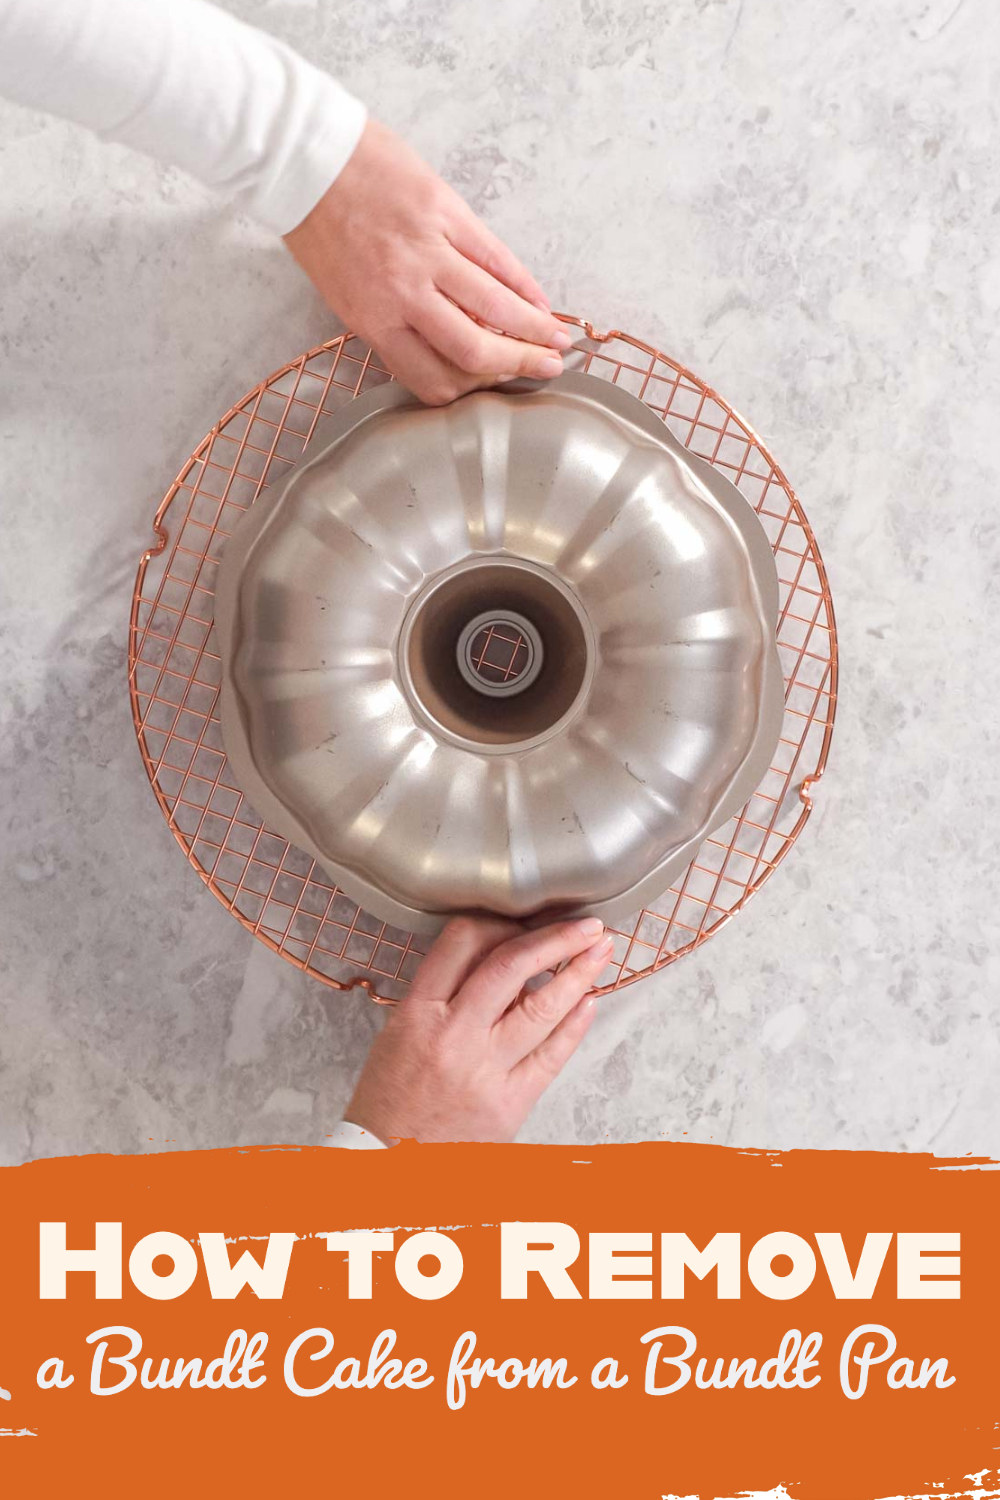 How to Remove a Bundt Cake from a Bundt Pan